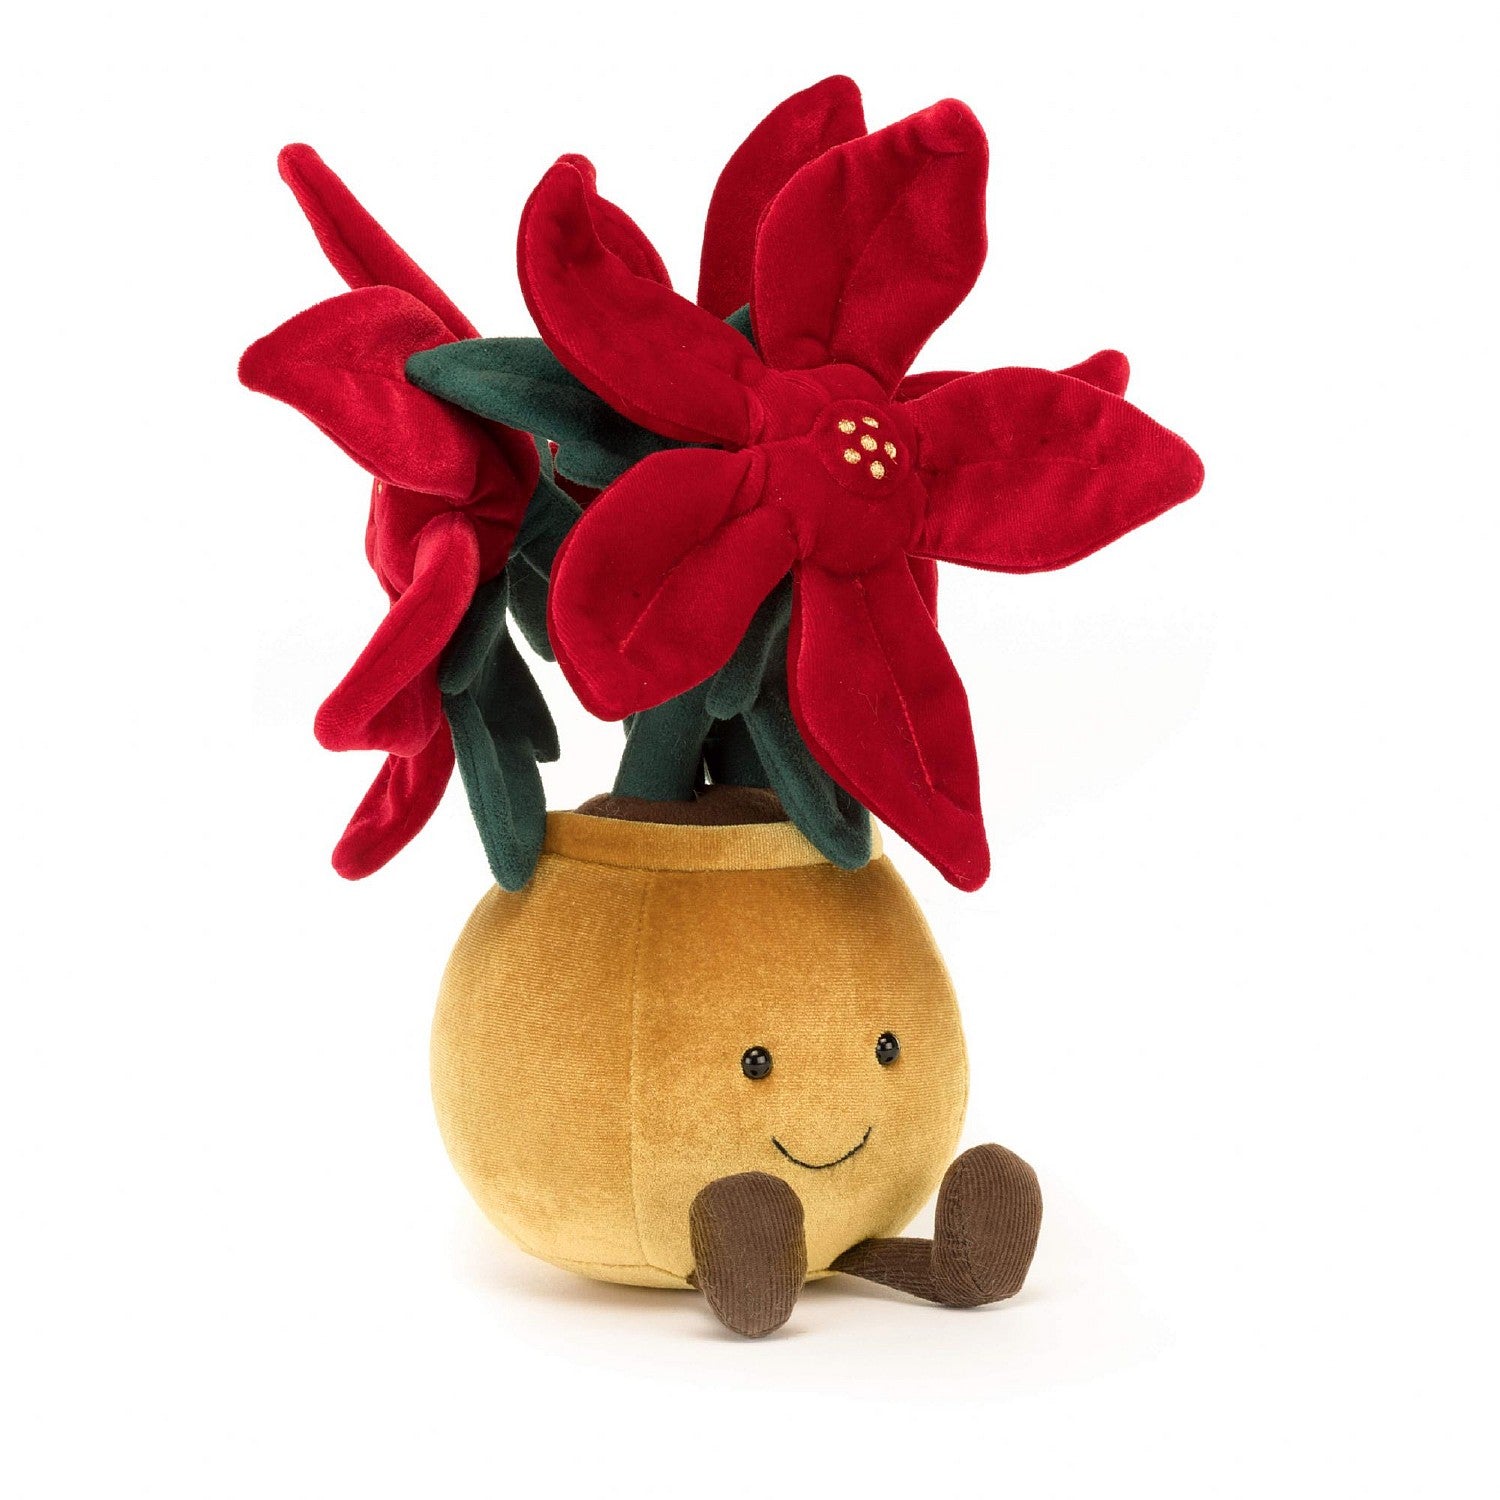 jellycat fabric bright red poinsettia in a light brown fabric pot decorated with an embroidered mouse and bead eyes